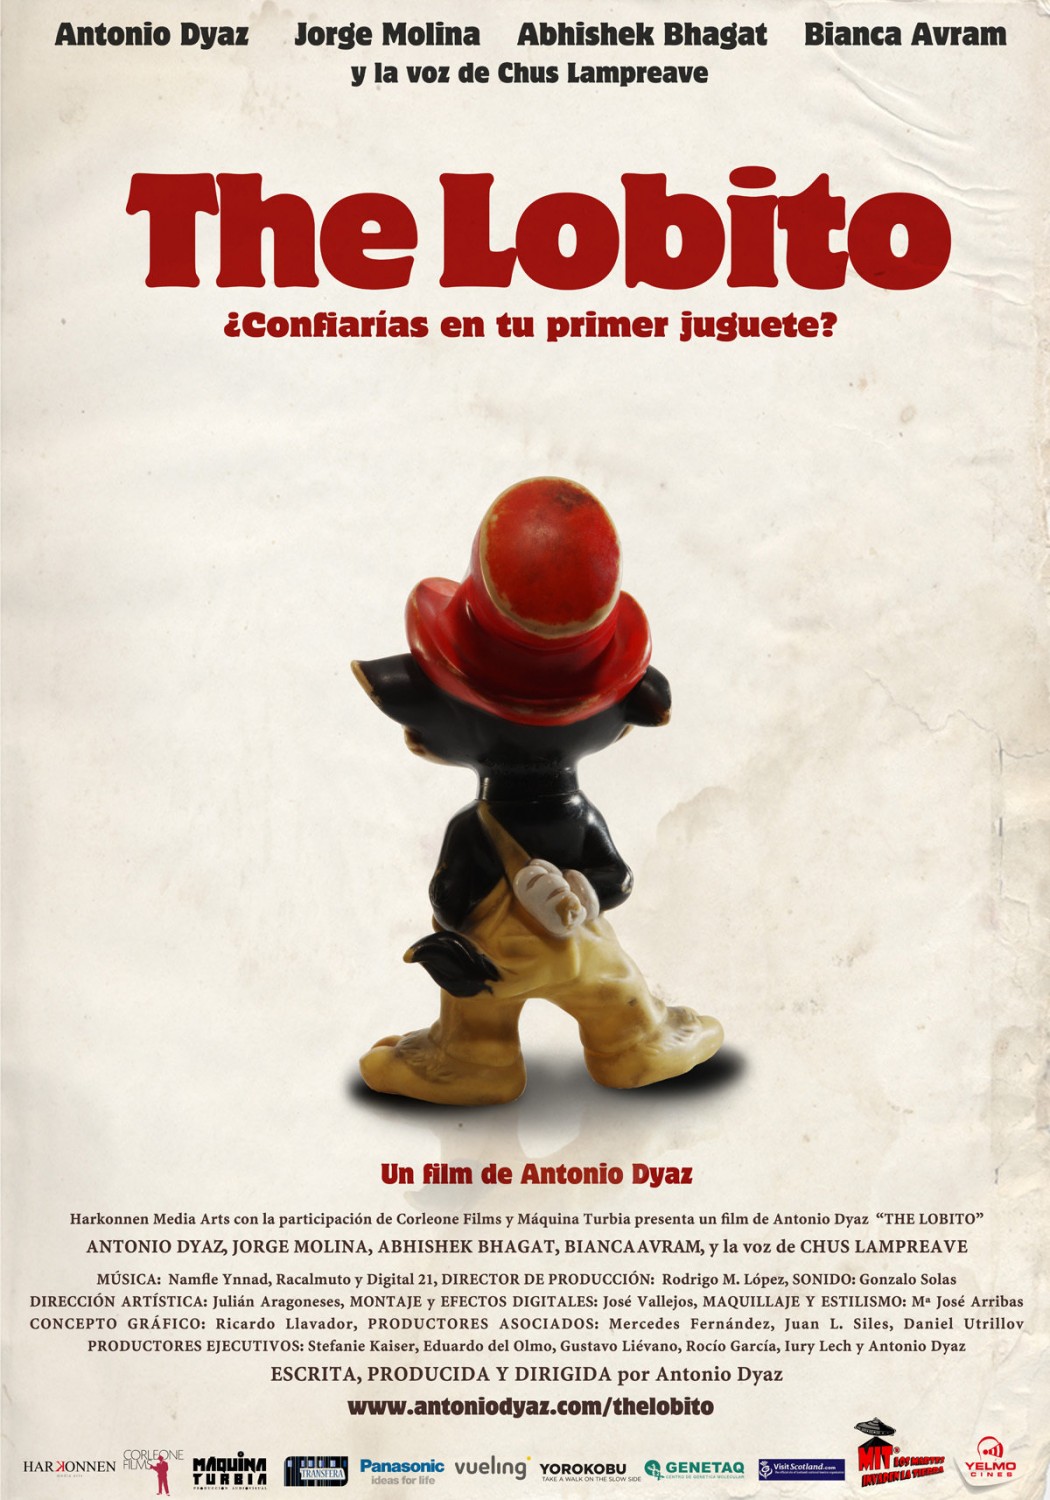 Extra Large Movie Poster Image for The Lobito 